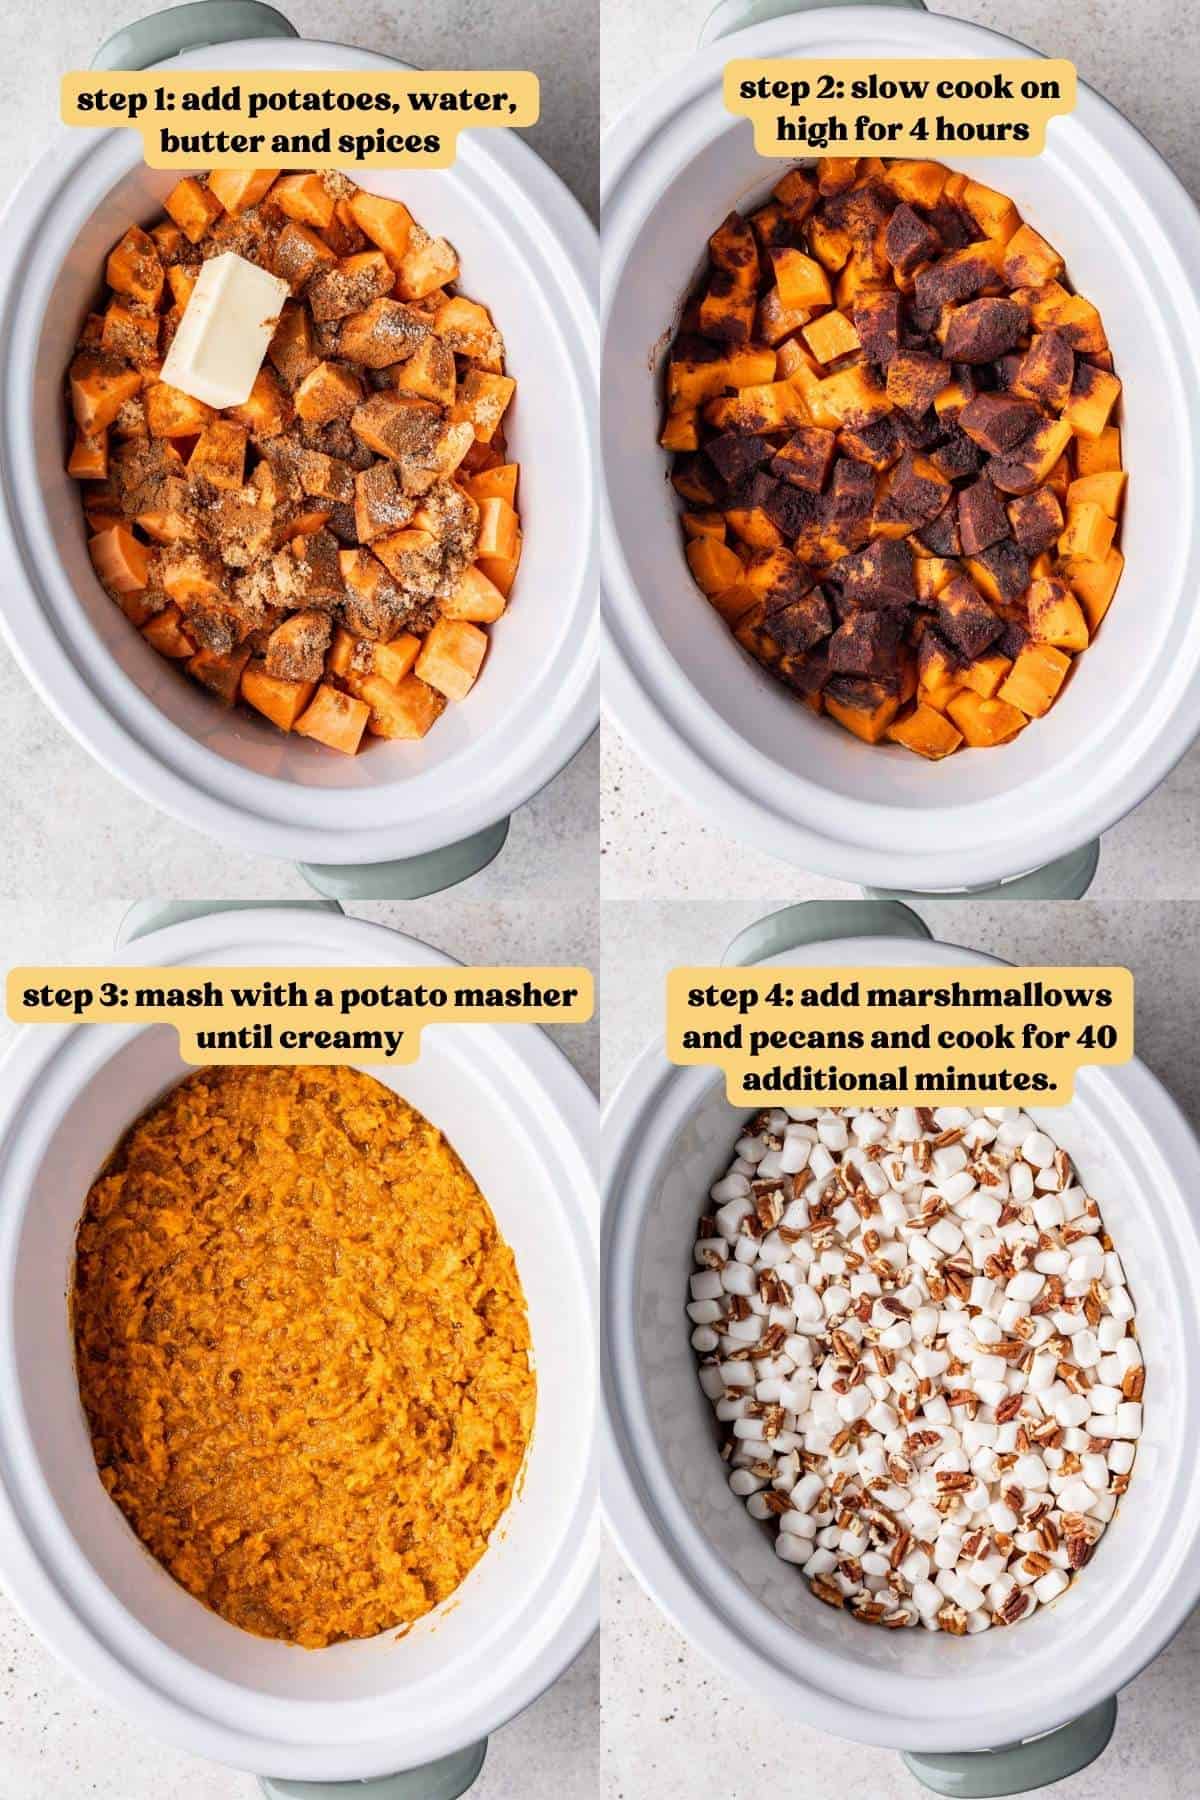 Step by step instructions showing how to make crockpot sweet potato casserole start to finish.